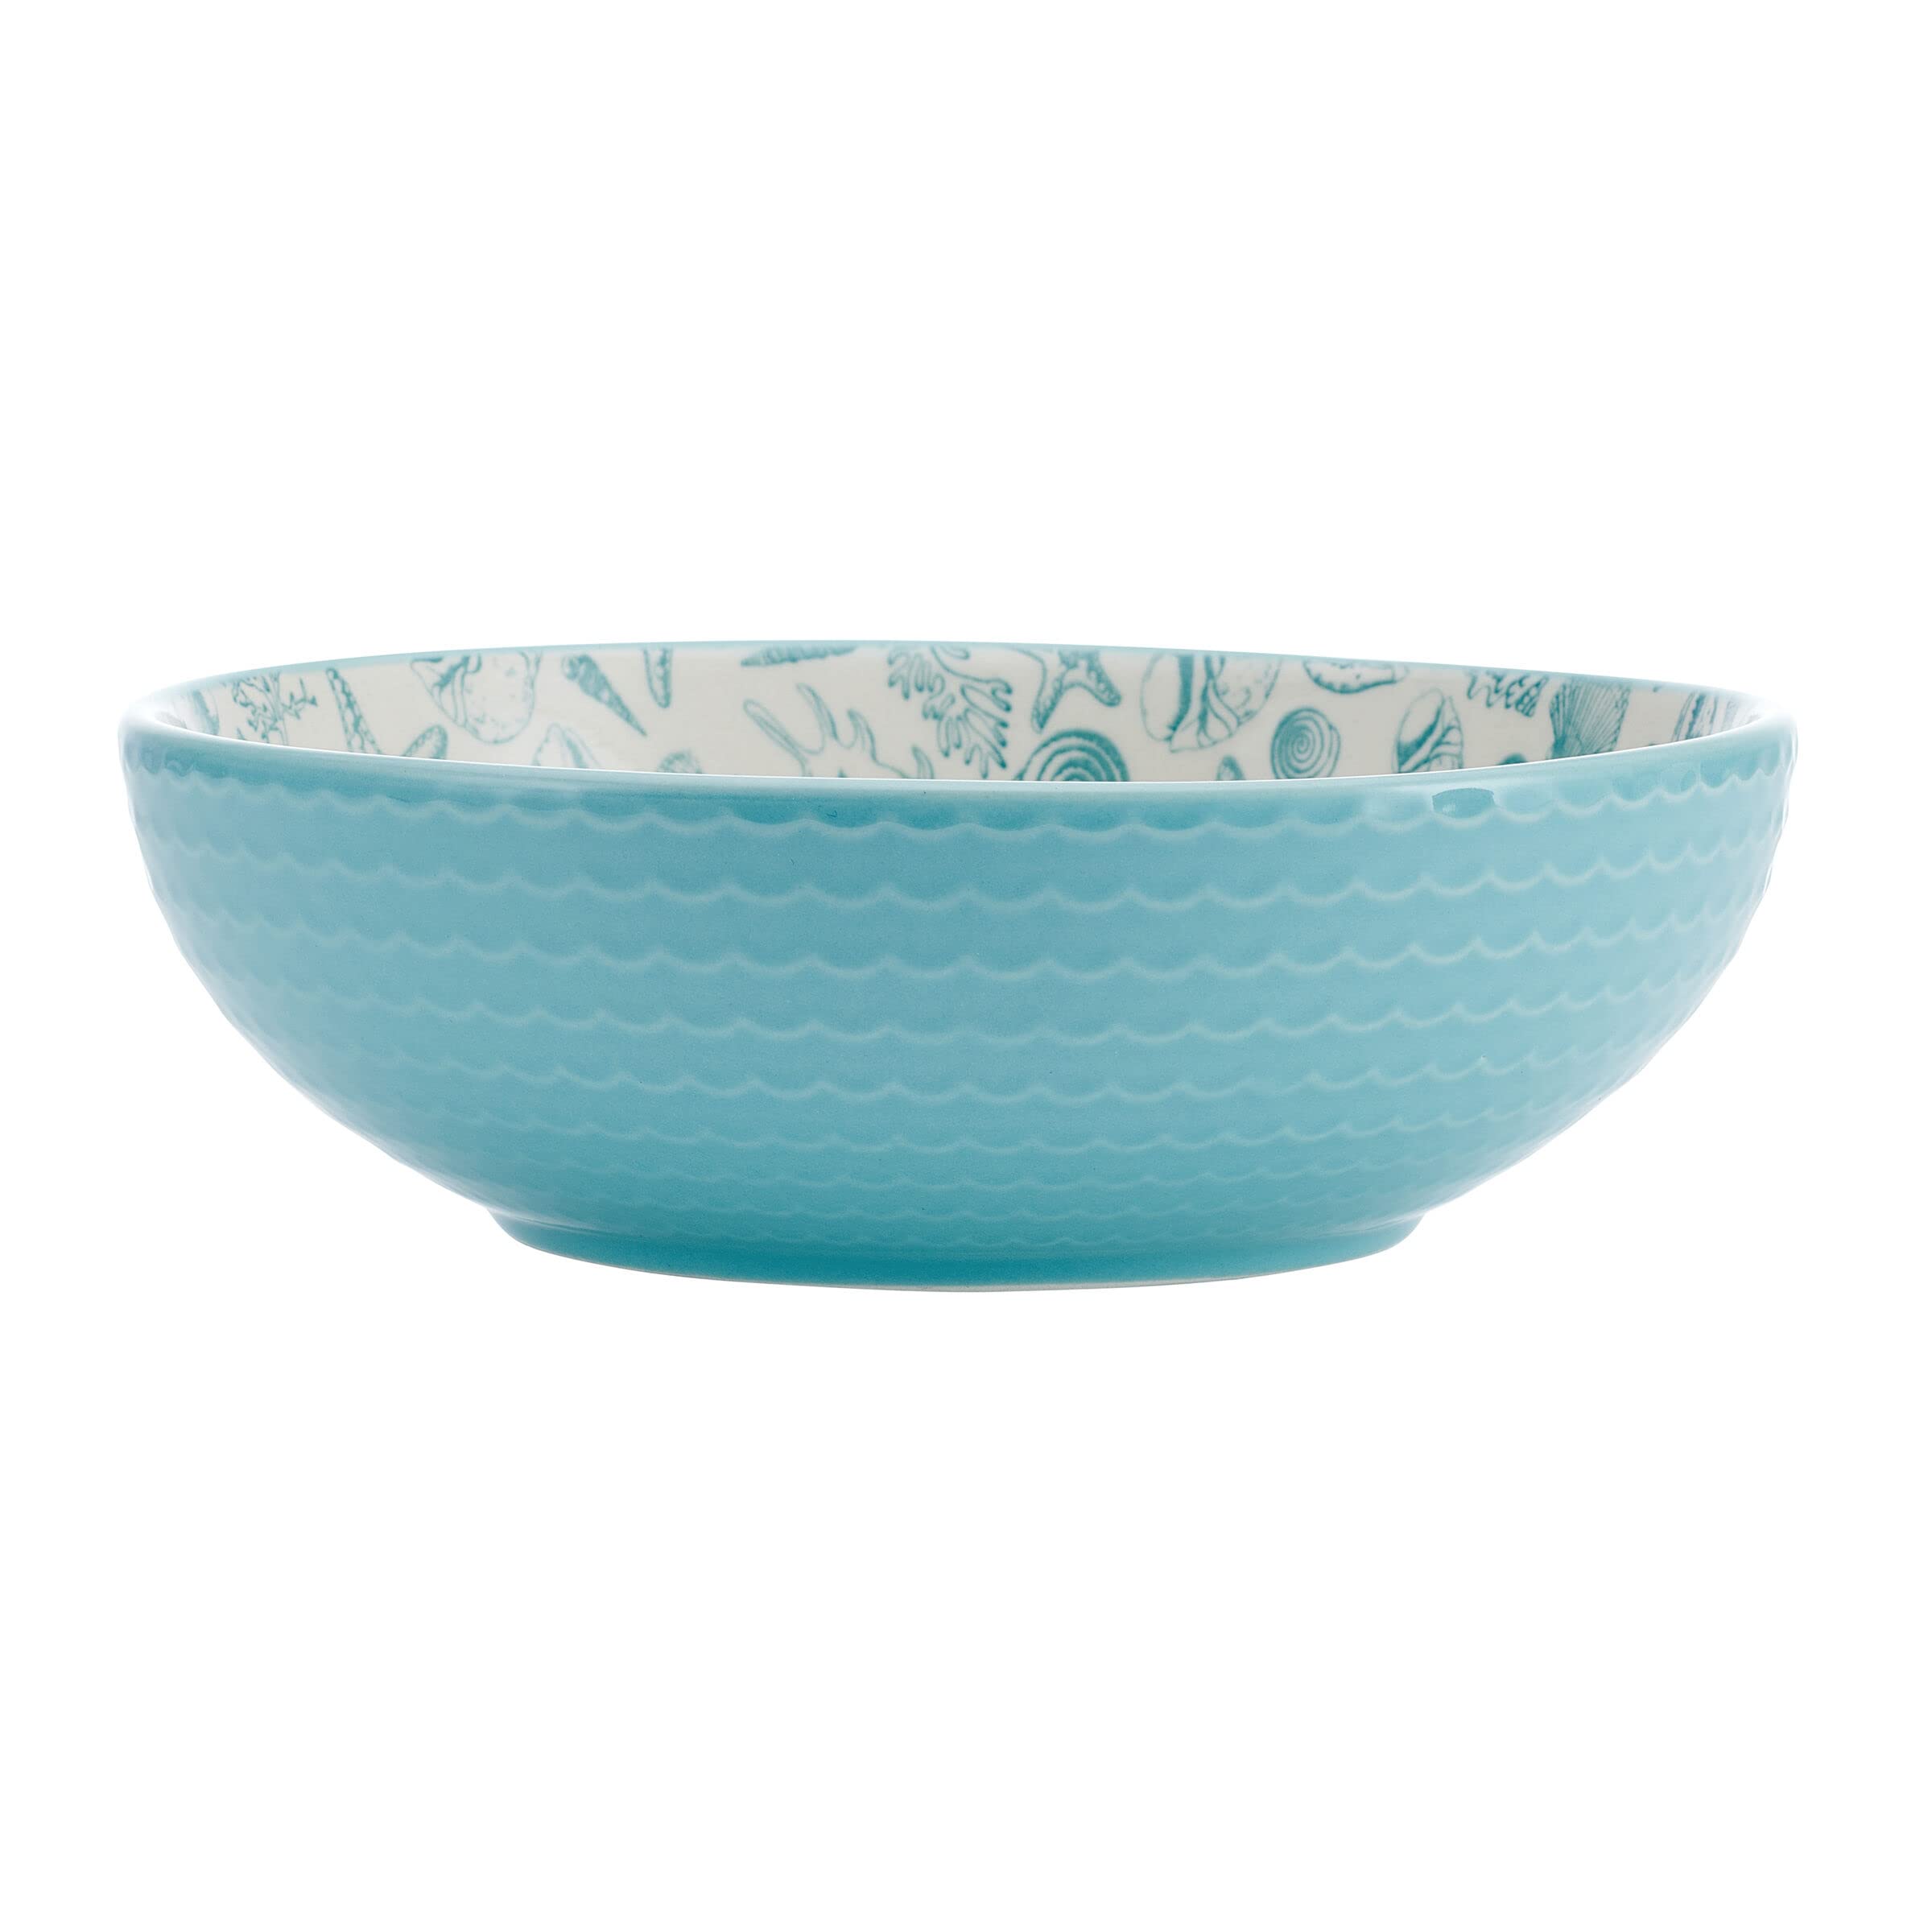 Pfaltzgraff Venice Set of 2 Pasta Bowls, 8 Inch, Teal and White